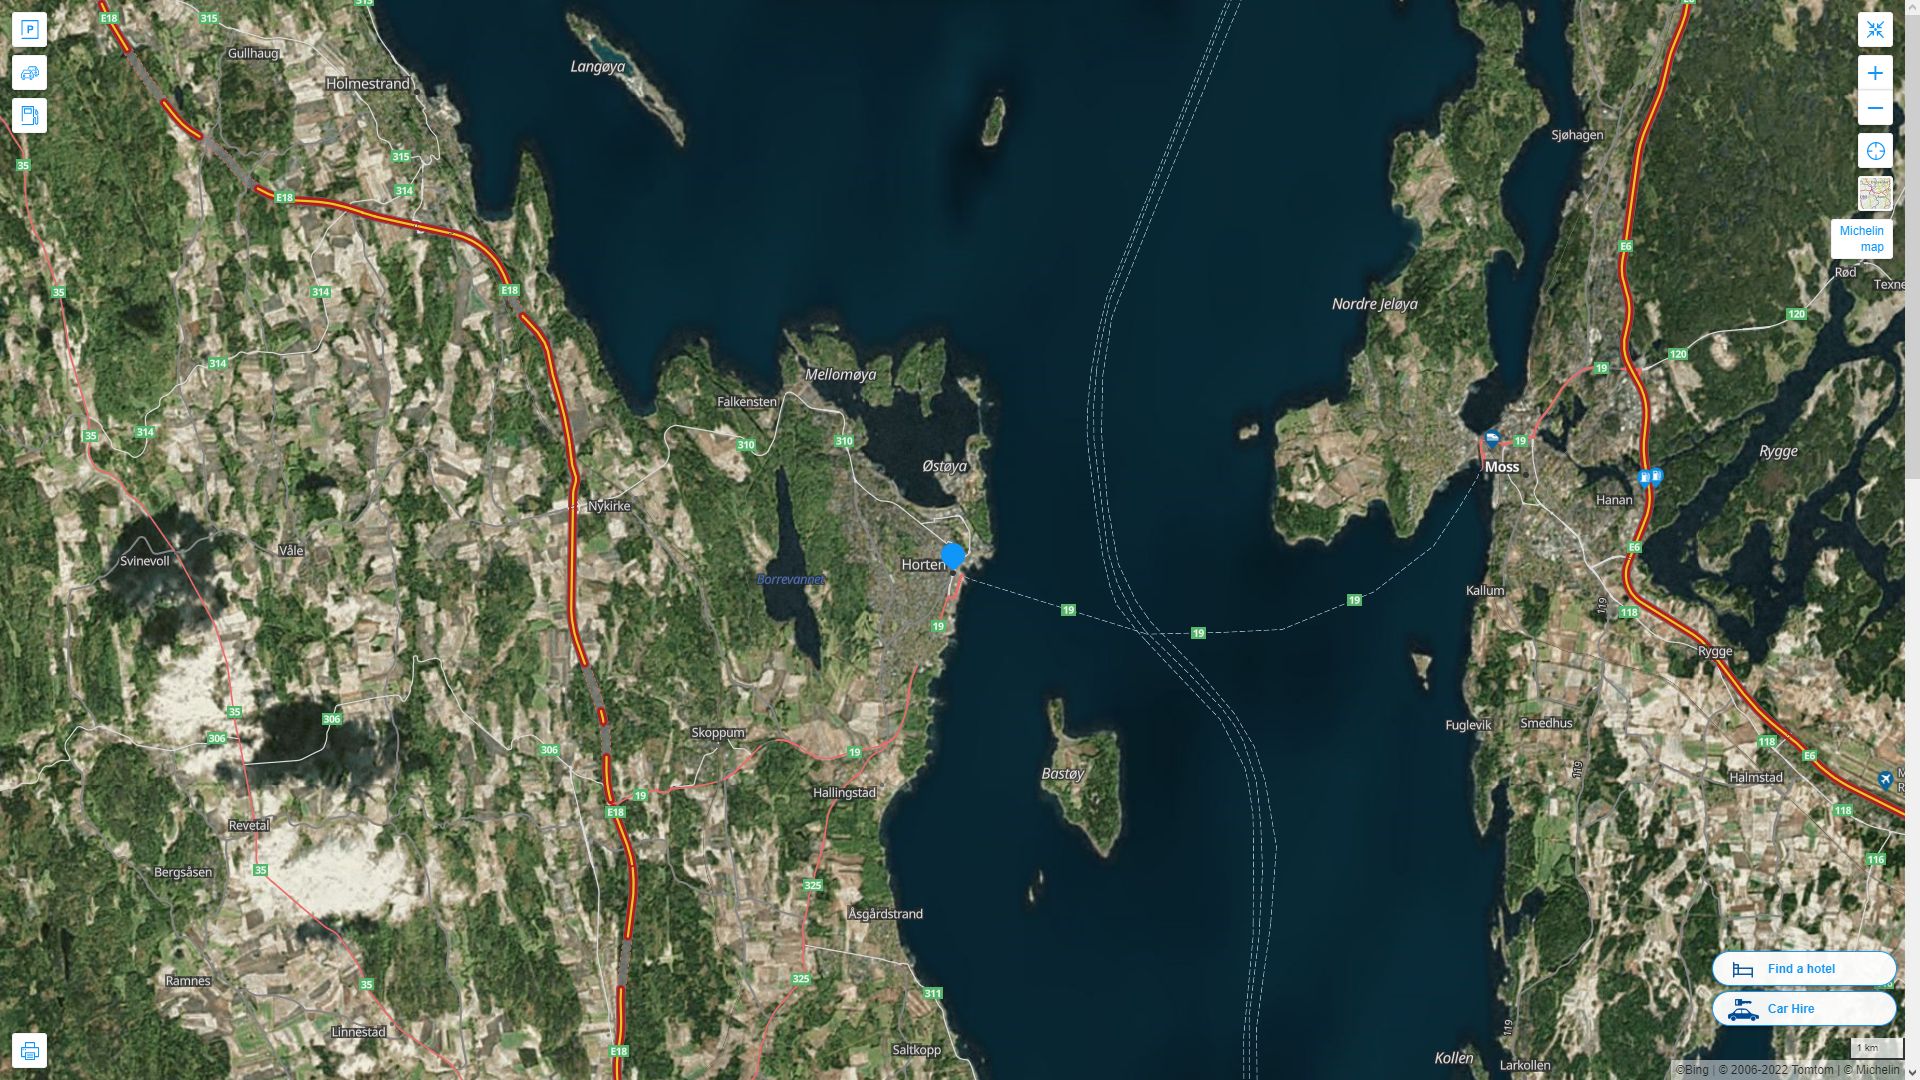 Horten Highway and Road Map with Satellite View